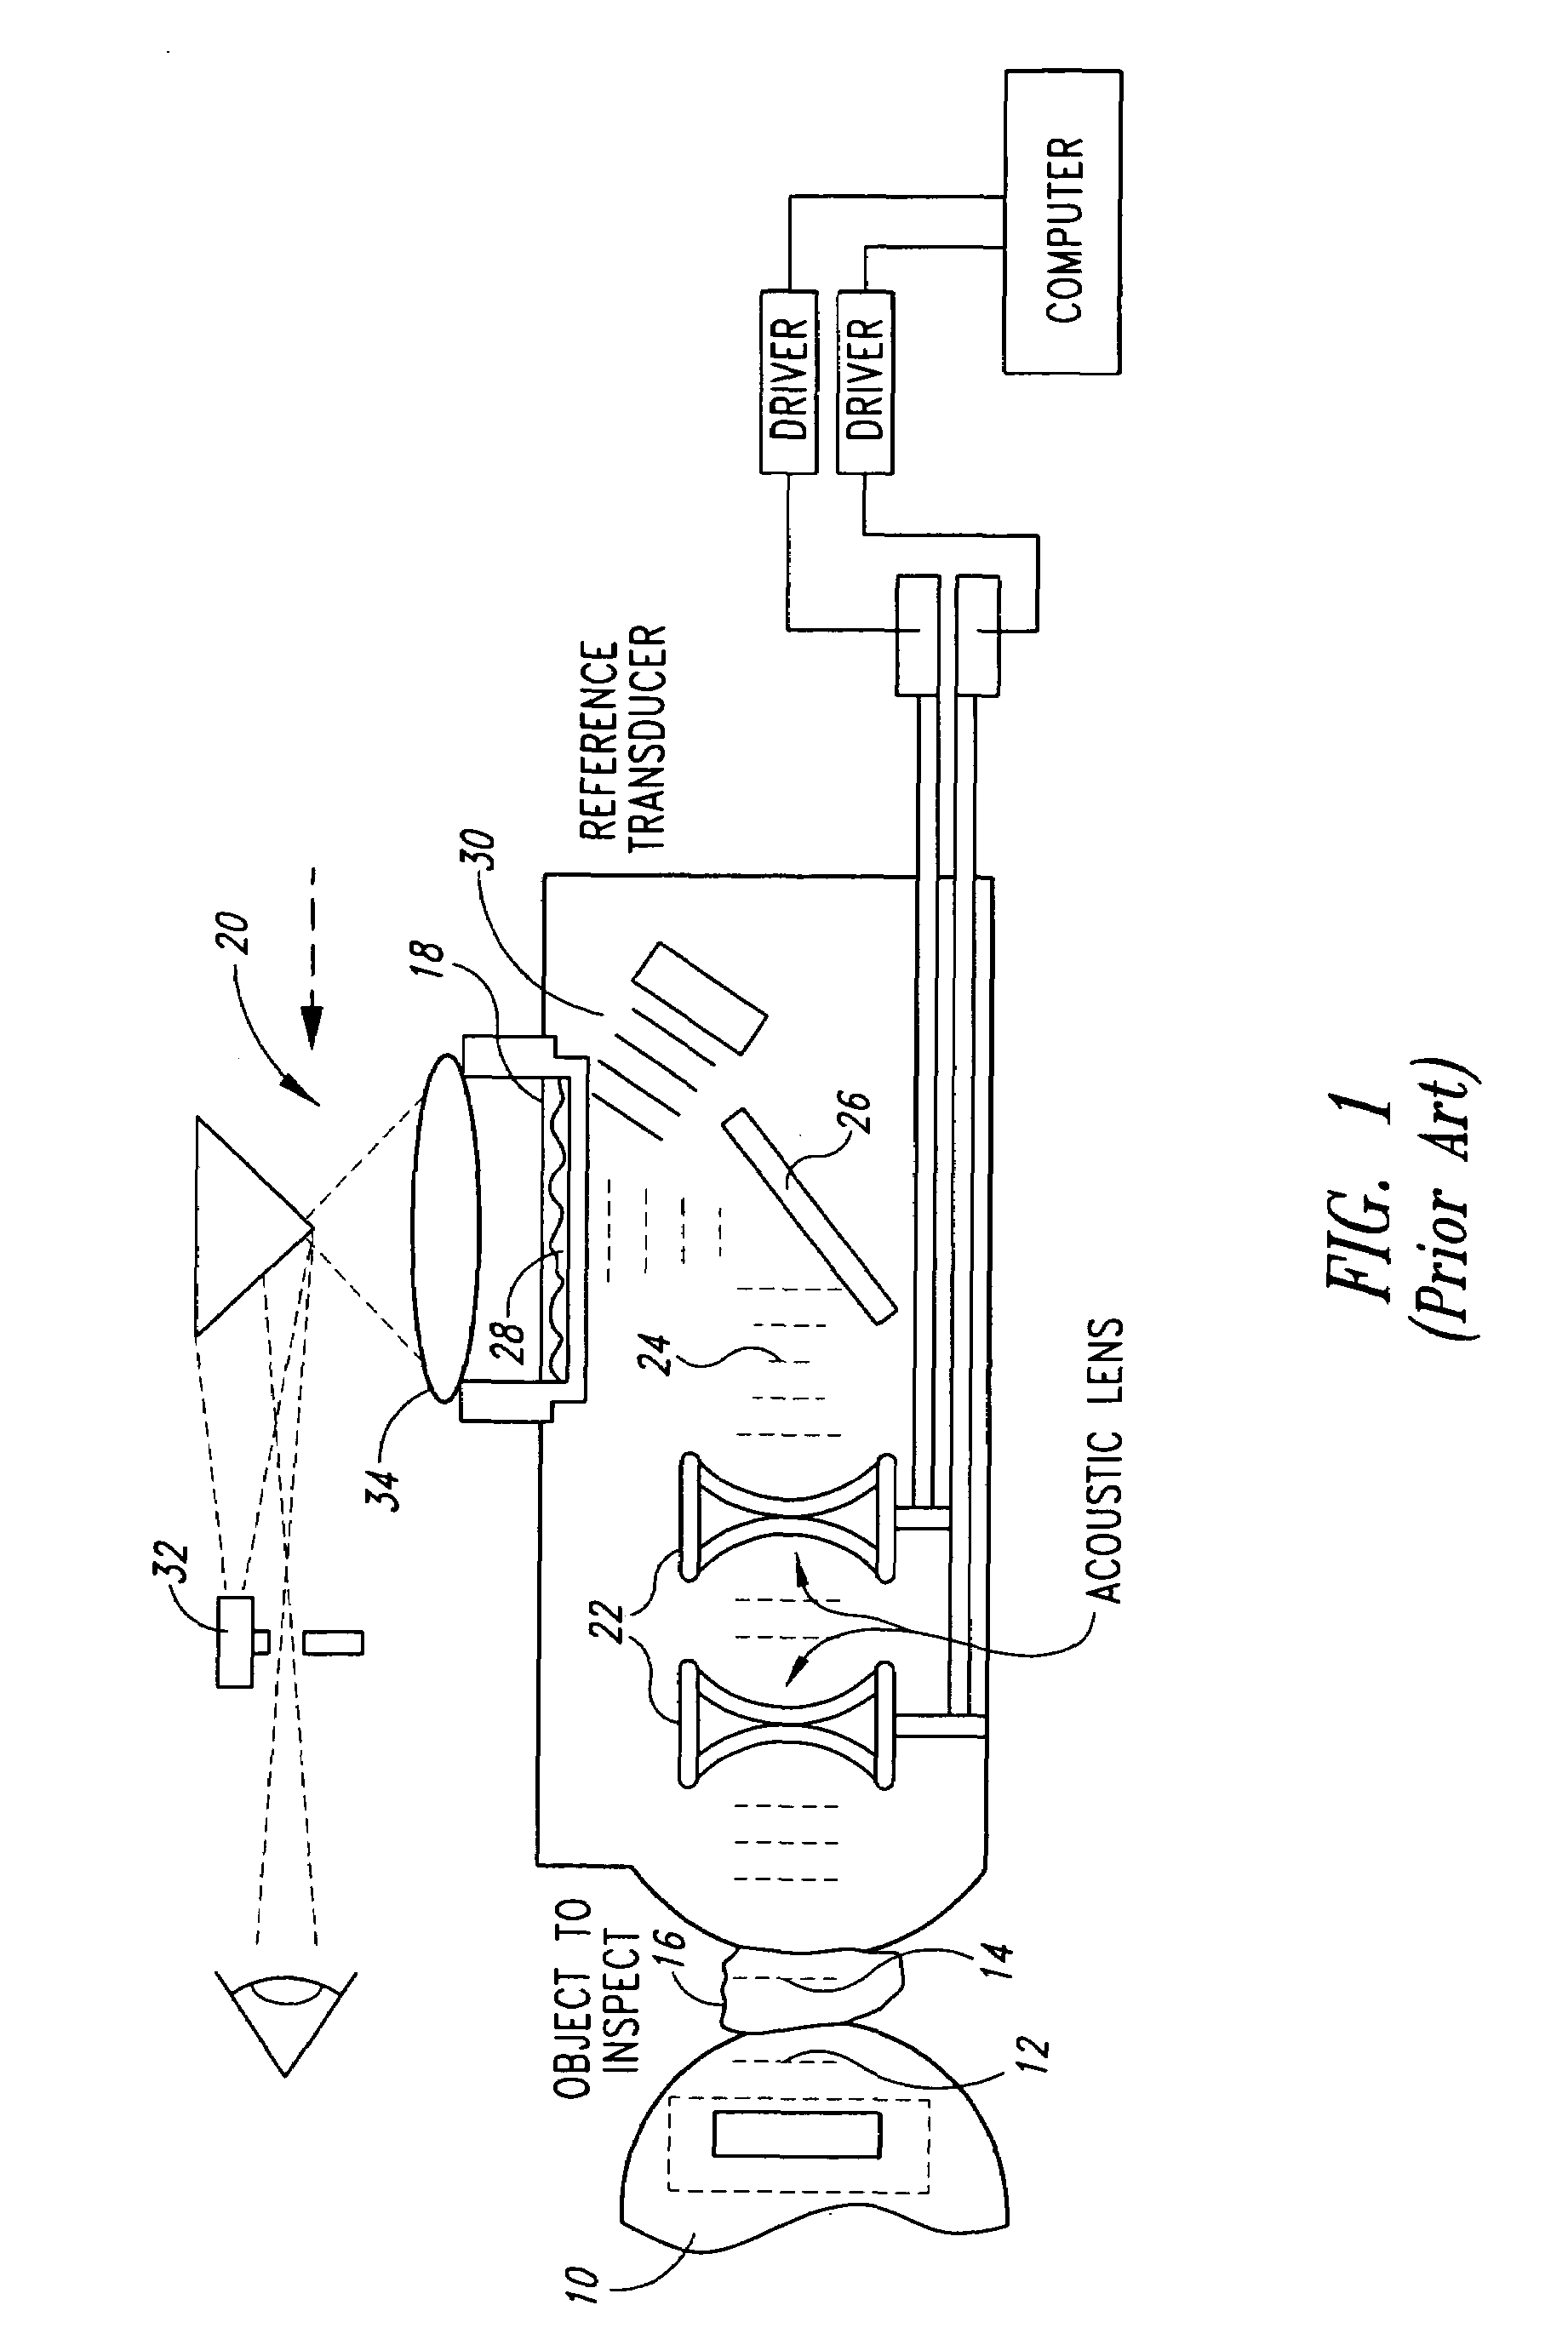 System, method and apparatus for direct imaging in ultrasonic holography